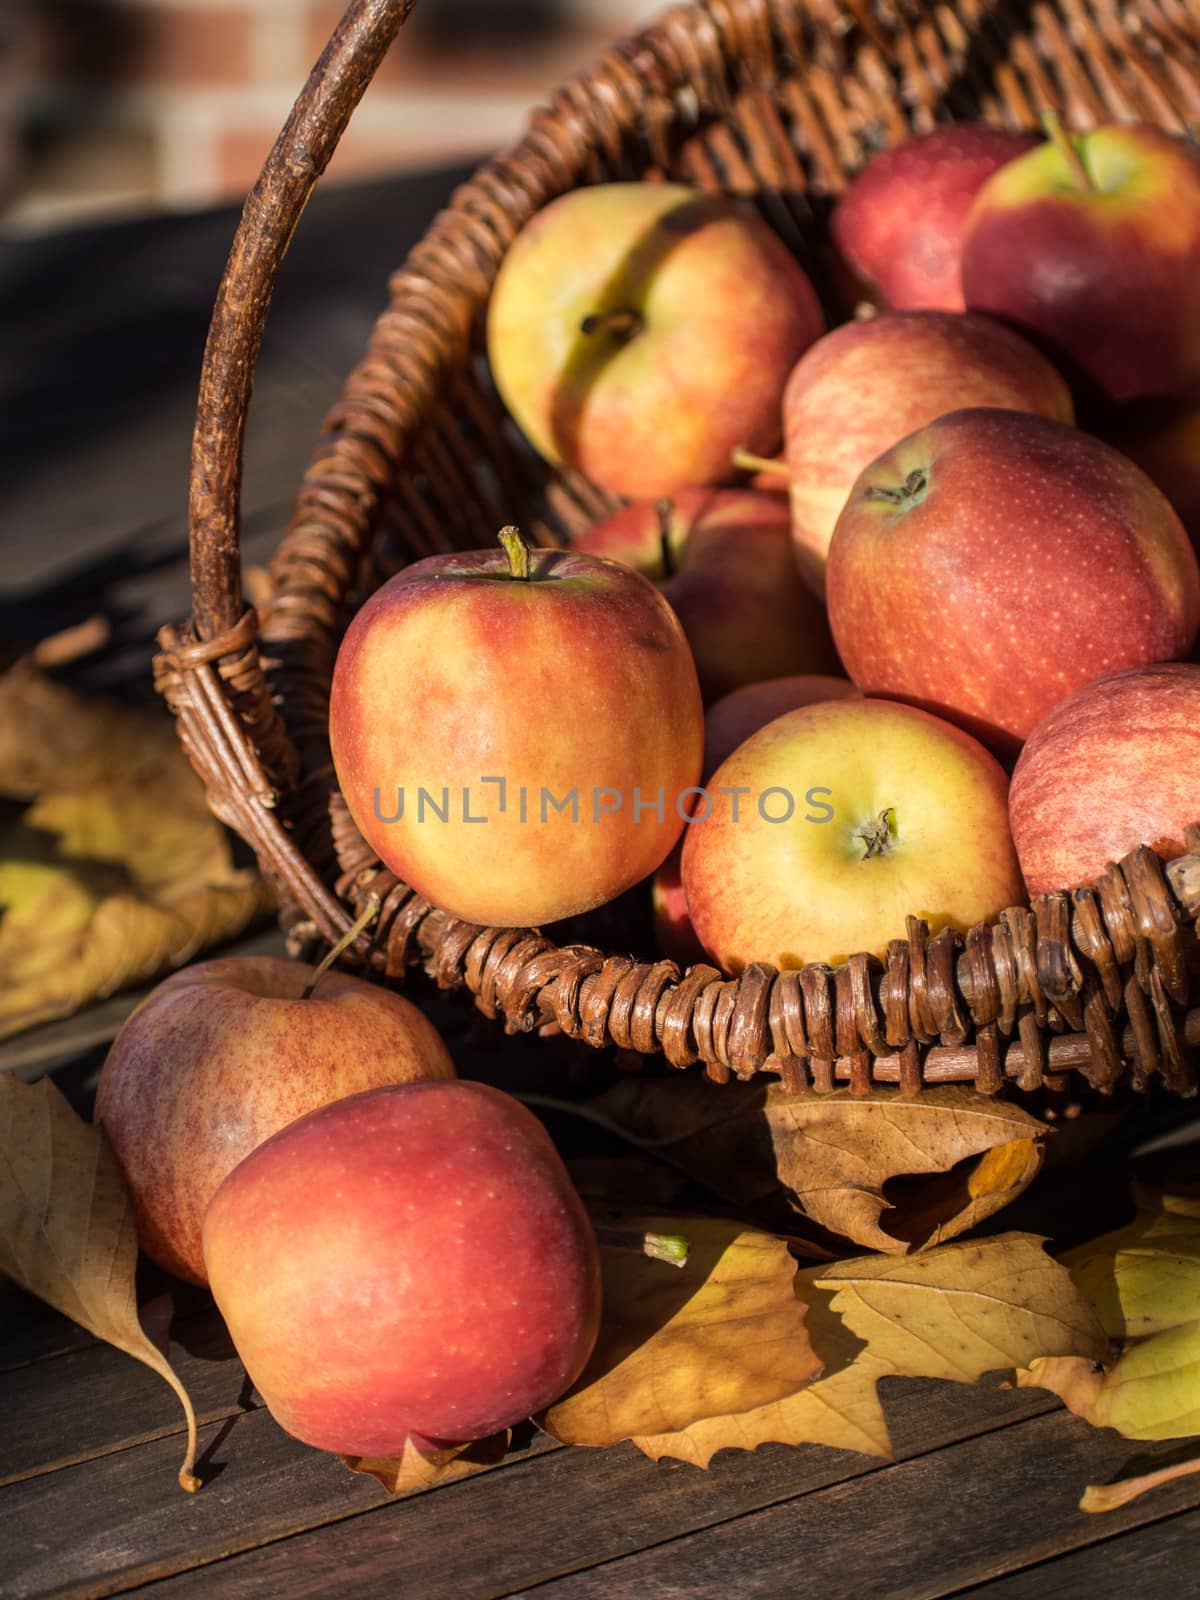 Wicker basket with red apples on a wooden table.